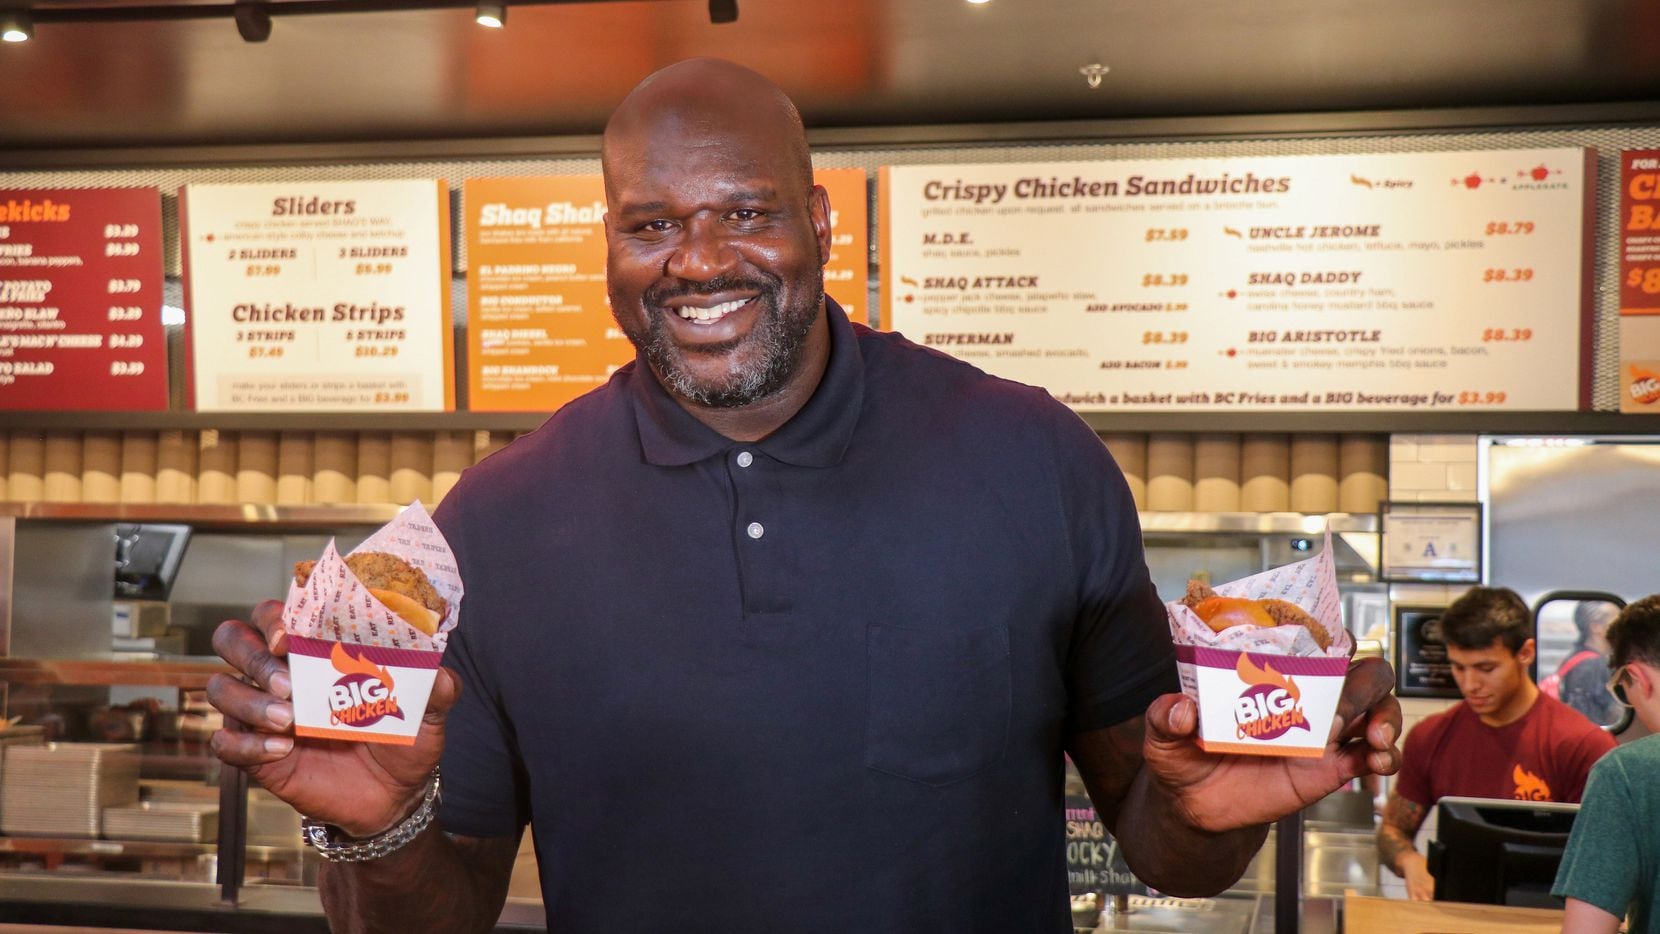 Shaquille O'Neal is the face of a growing chicken brand called Big Chicken. More than 50...